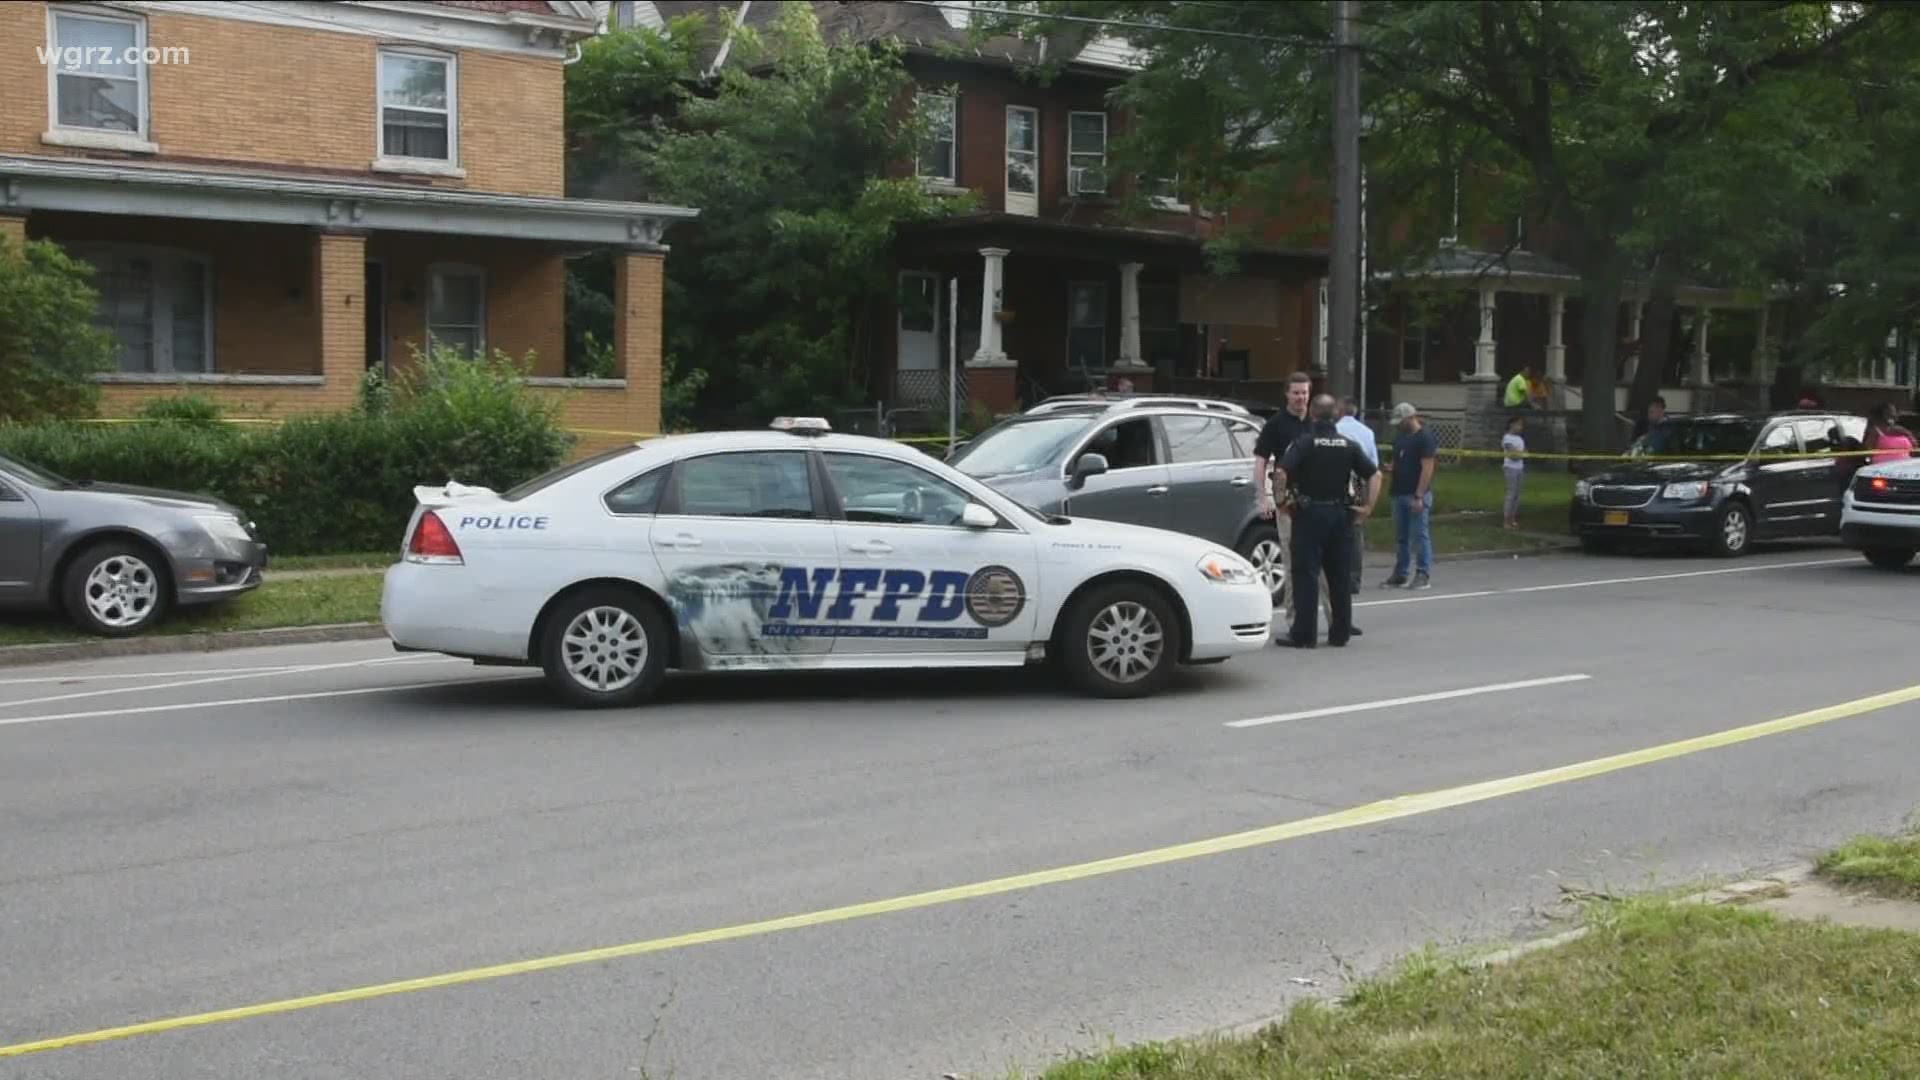 POLICE SAY A 29-YEAR-OLD MAN FROM NIAGARA FALLS WAS SHOT AROUND 5-30 LAST NIGHT... AND DIED.